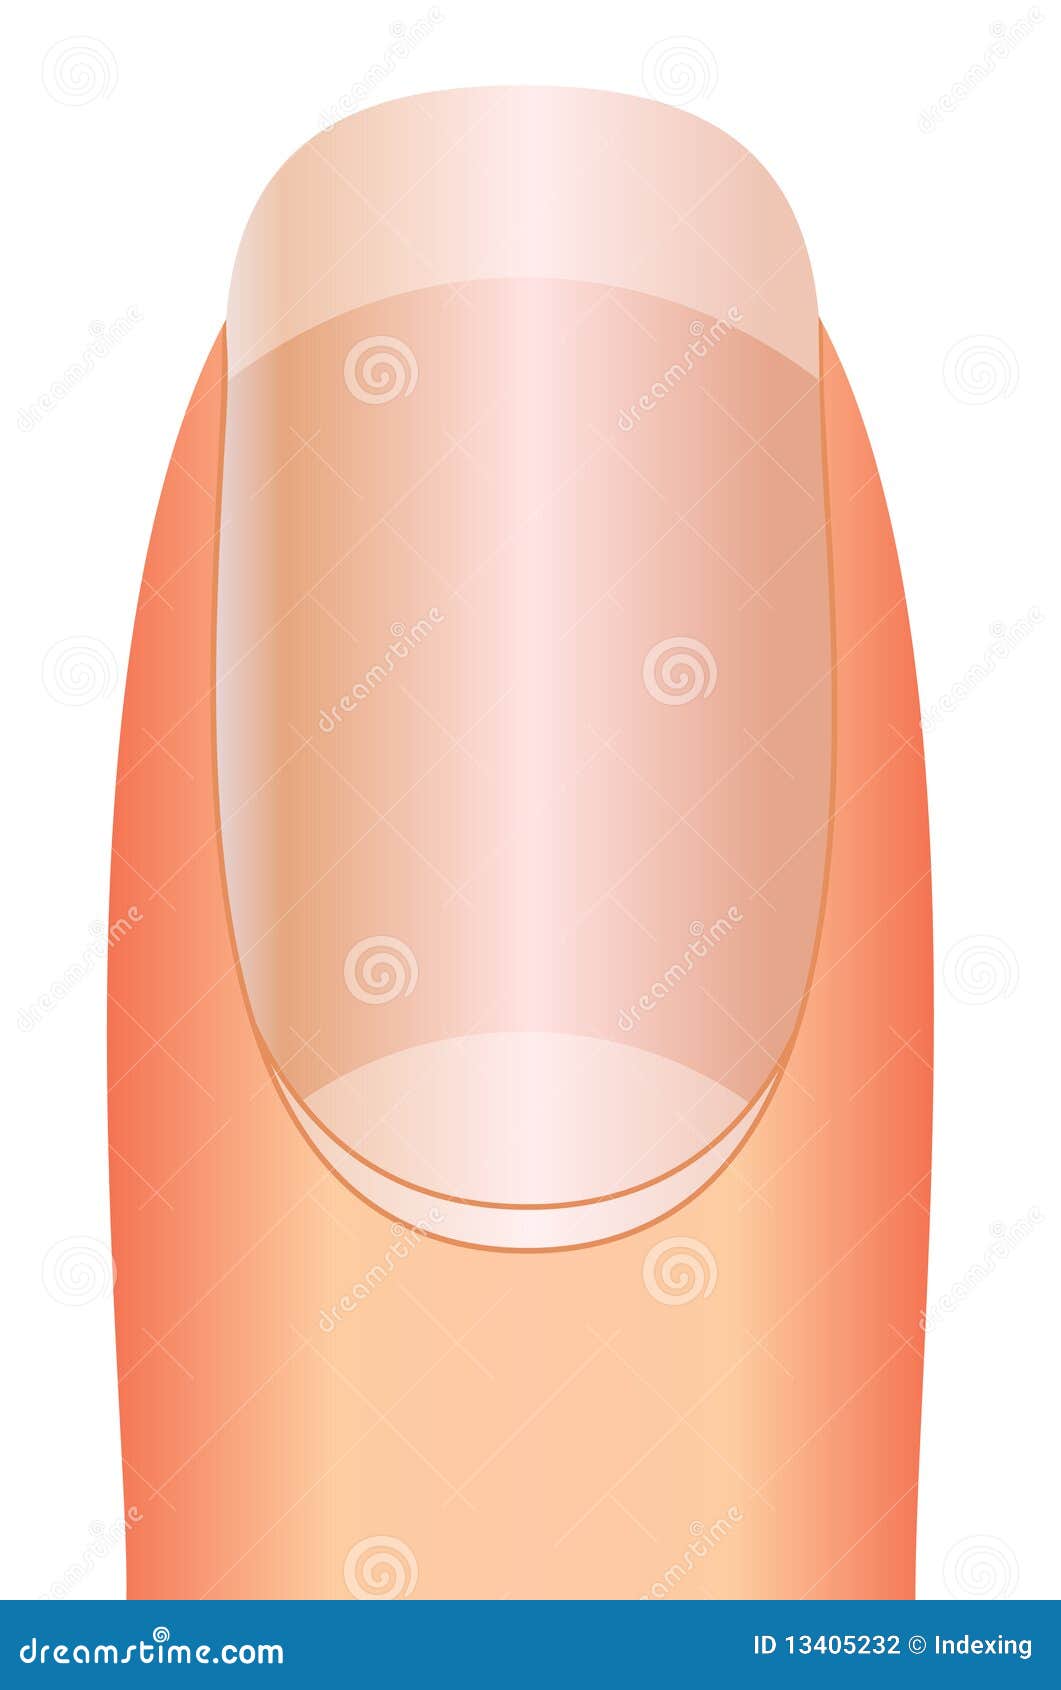 clipart of nails - photo #46